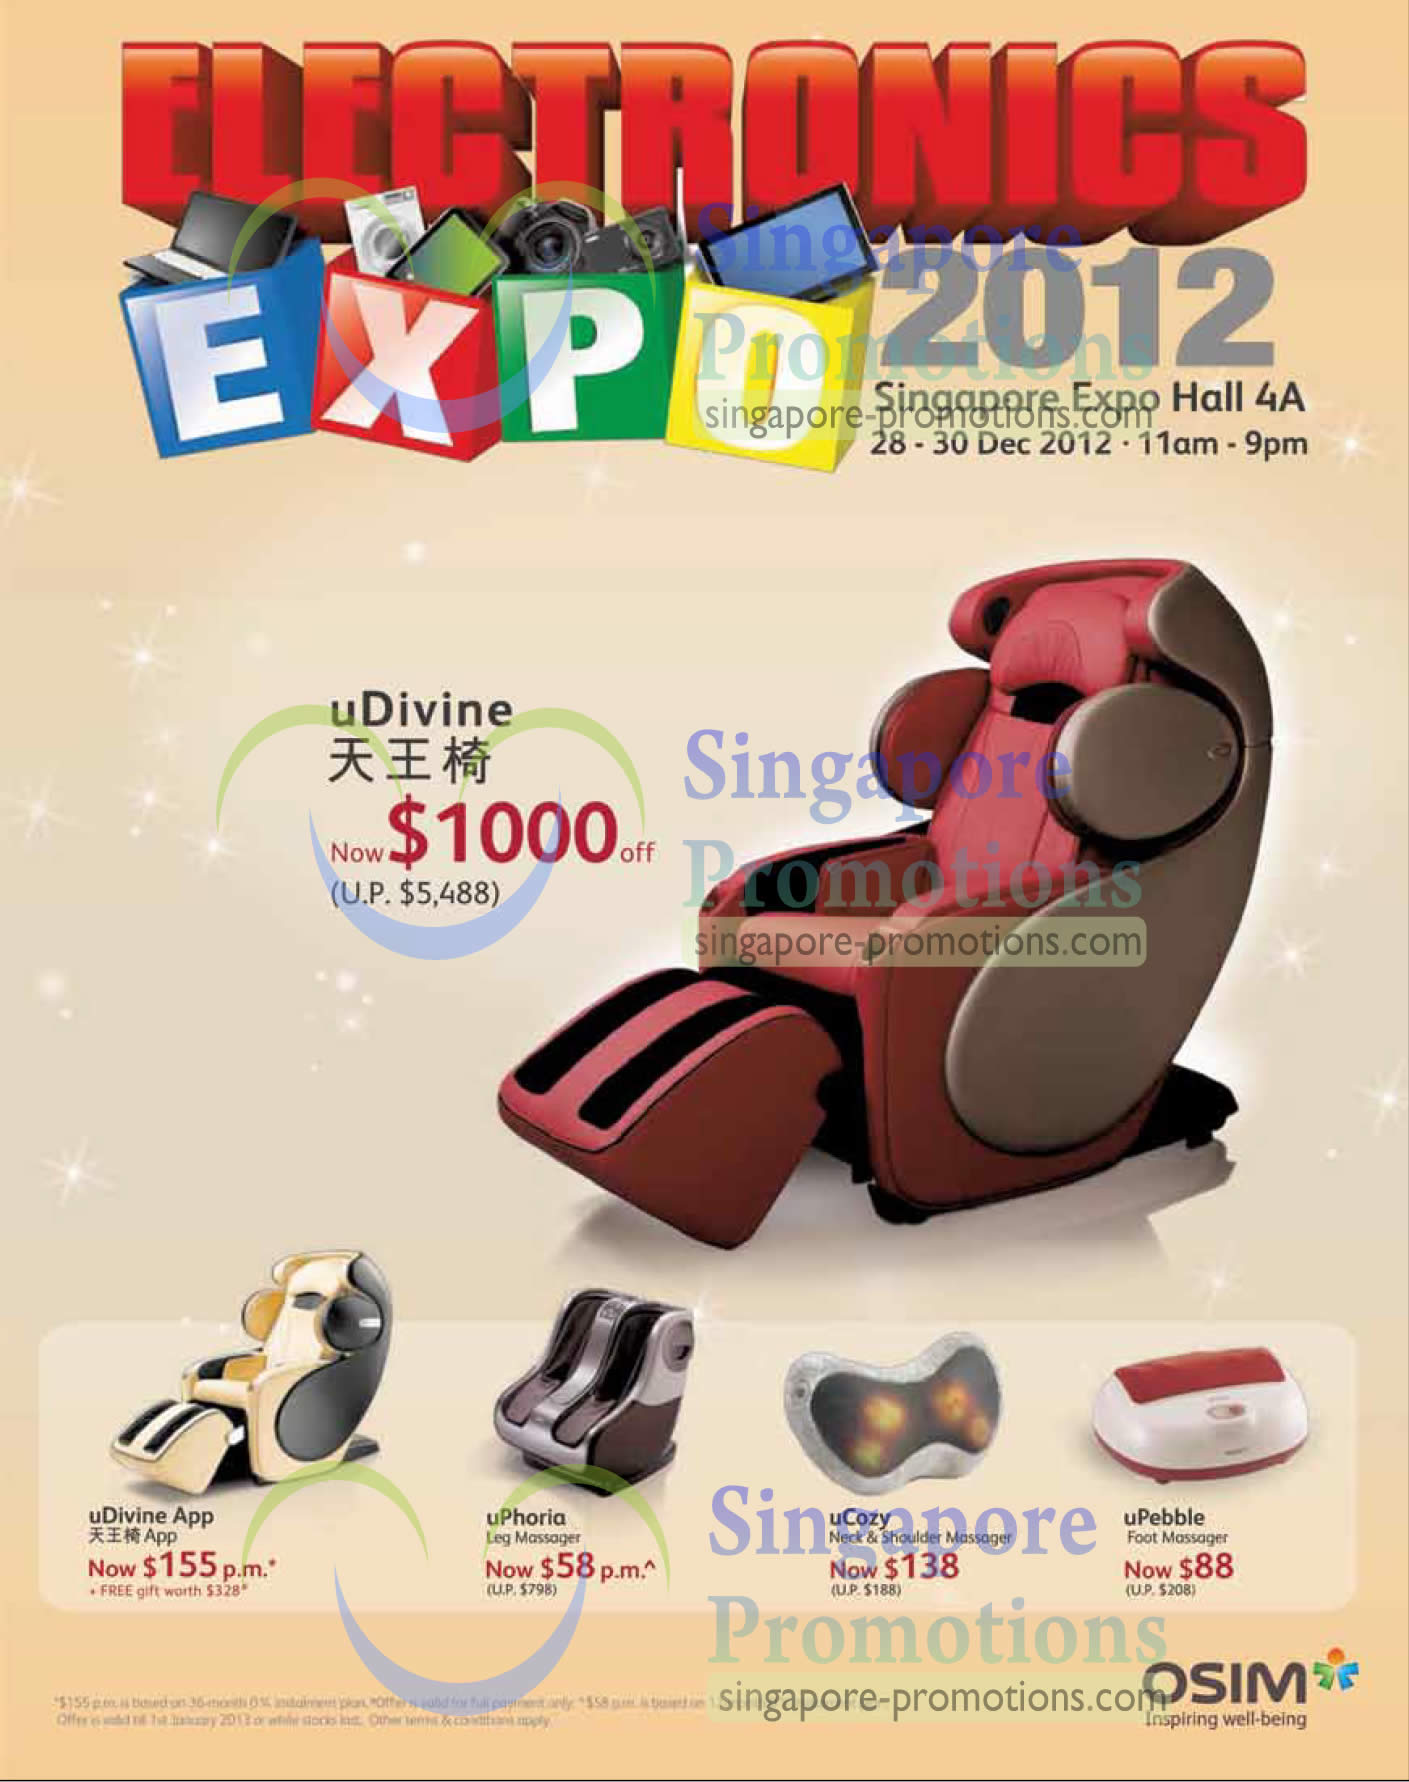 Featured image for Electronics Expo 2012 (3,000 Items Below $100 Daily) @ Singapore Expo 28 - 30 Dec 2012